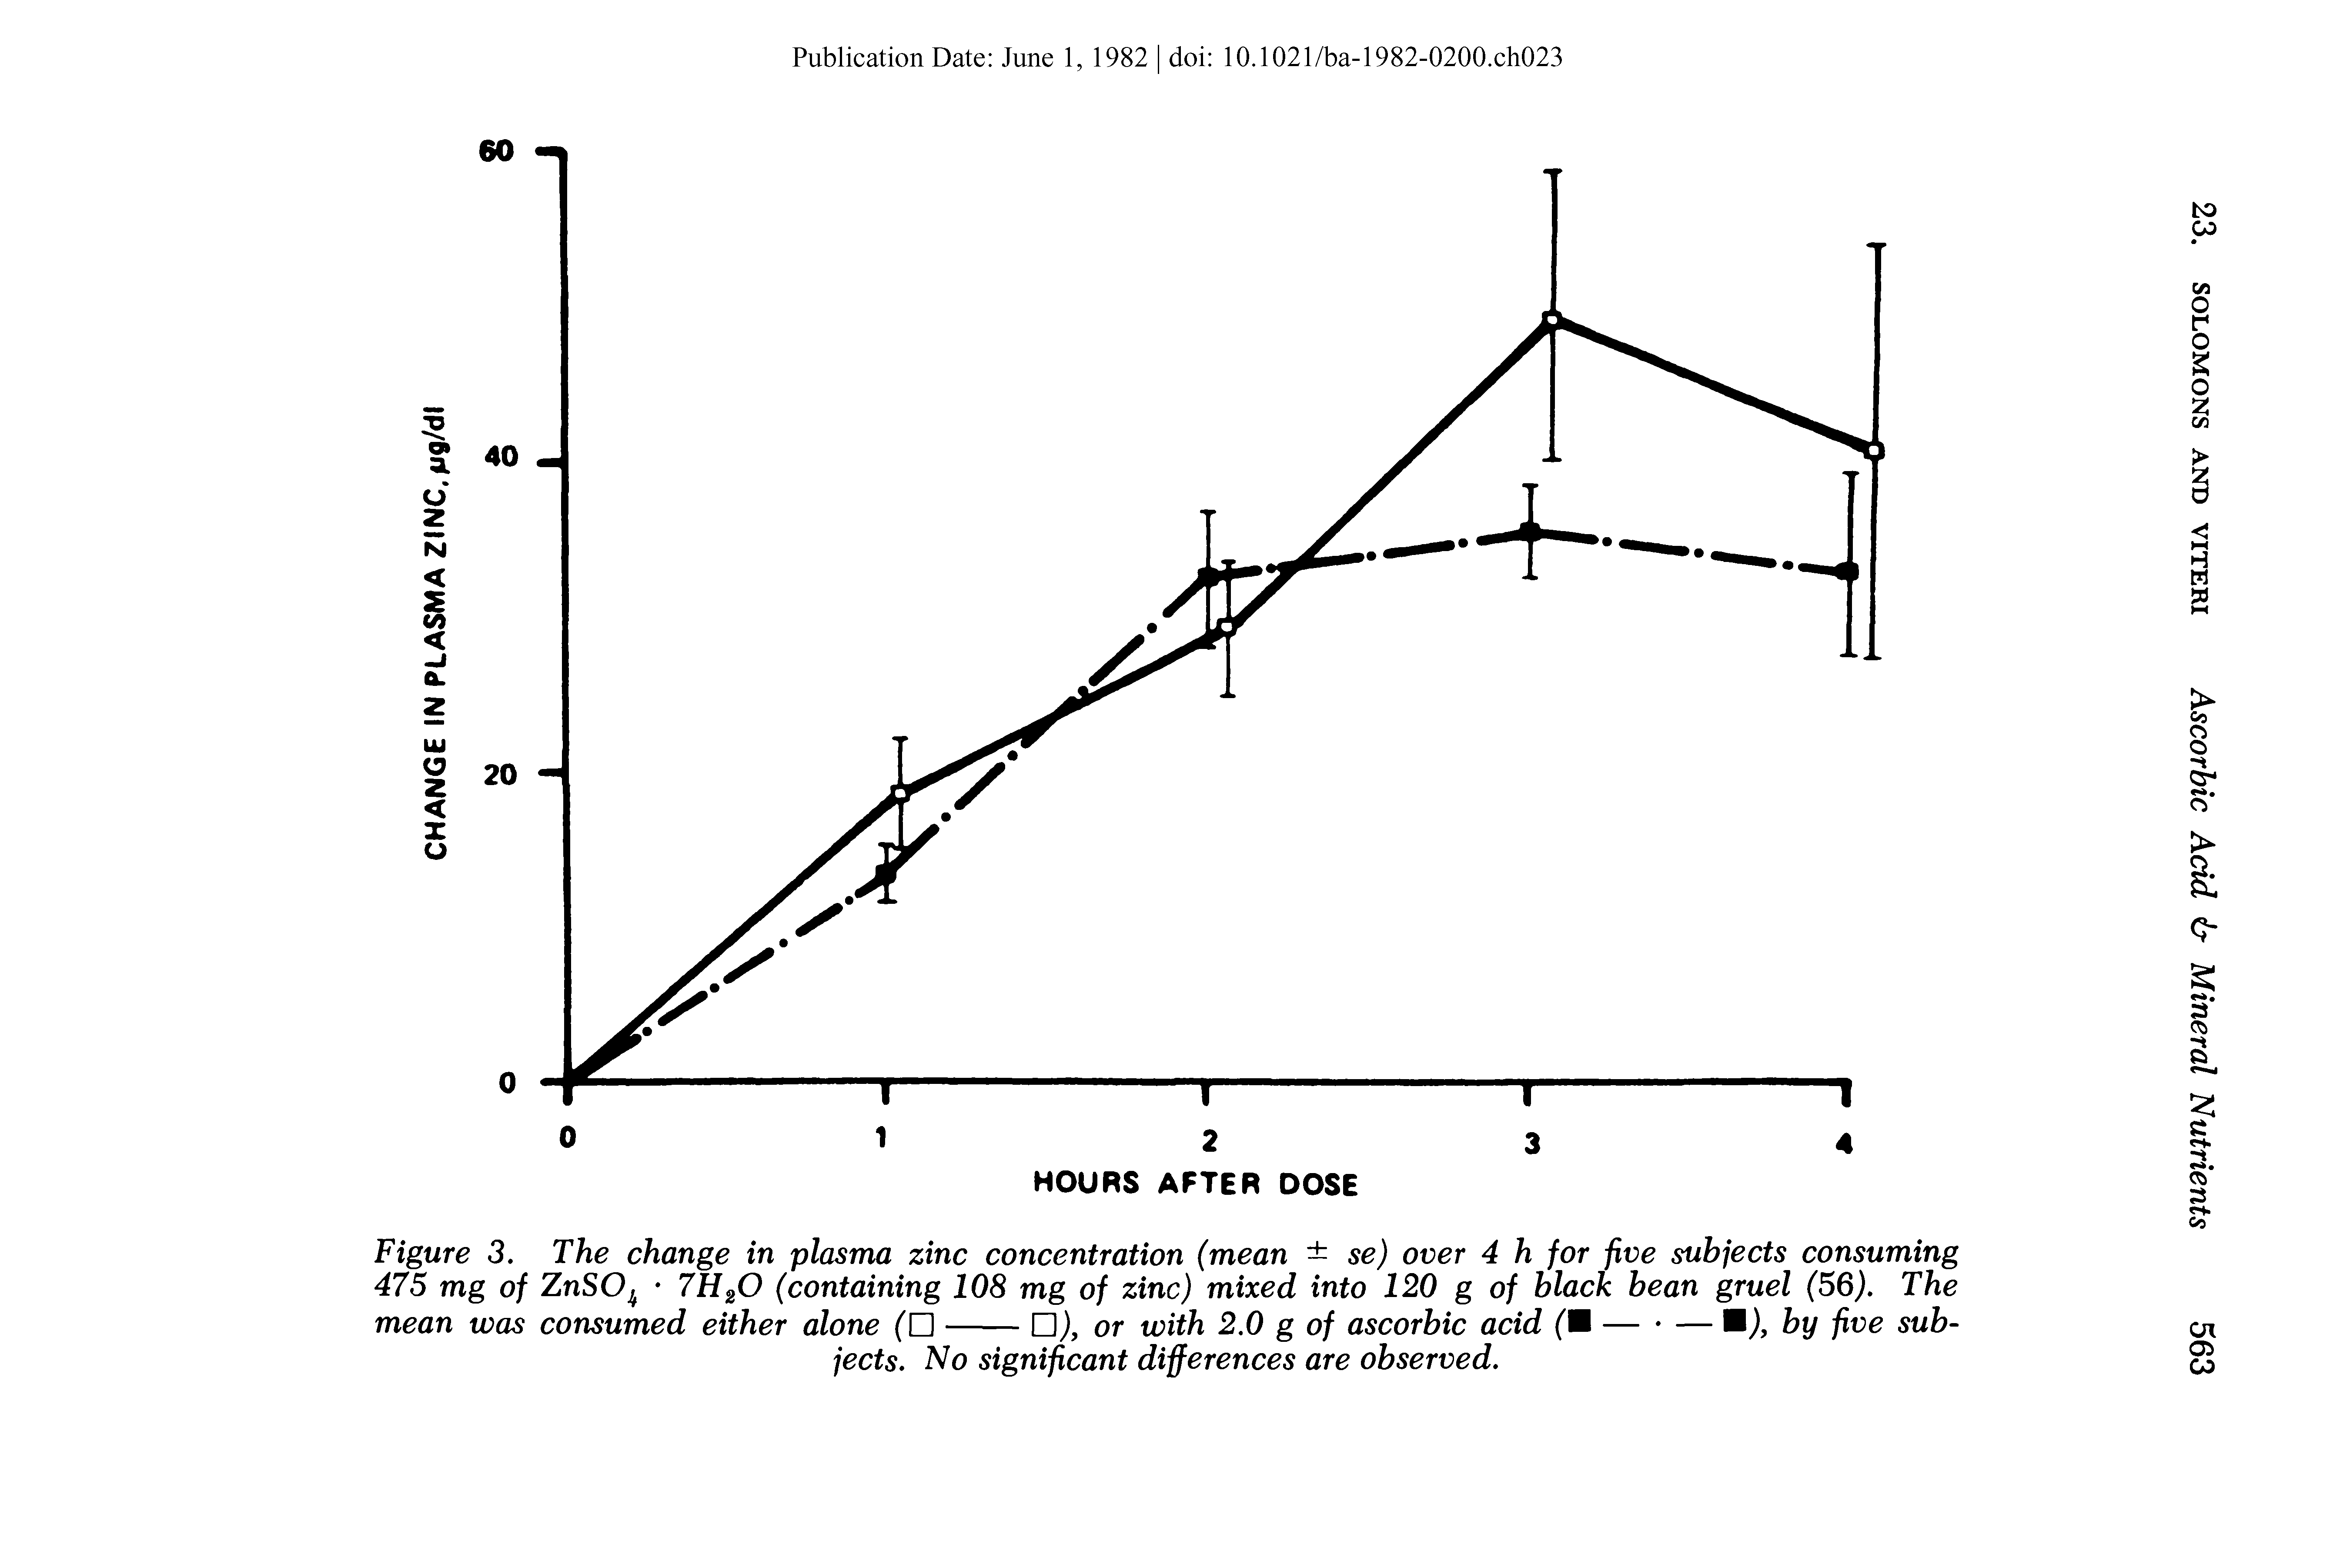 Figure 3. The change in plasma zinc concentration (mean se) over 4 h for five subjects consuming 475 mg of ZnSOj ZHgO (containing 108 mg of zinc) mixed into 120 g of black bean gruel (56). The mean was consumed either alone ( ----- ), or with 2.0 g of ascorbic acid ( — — ), by five sub-...